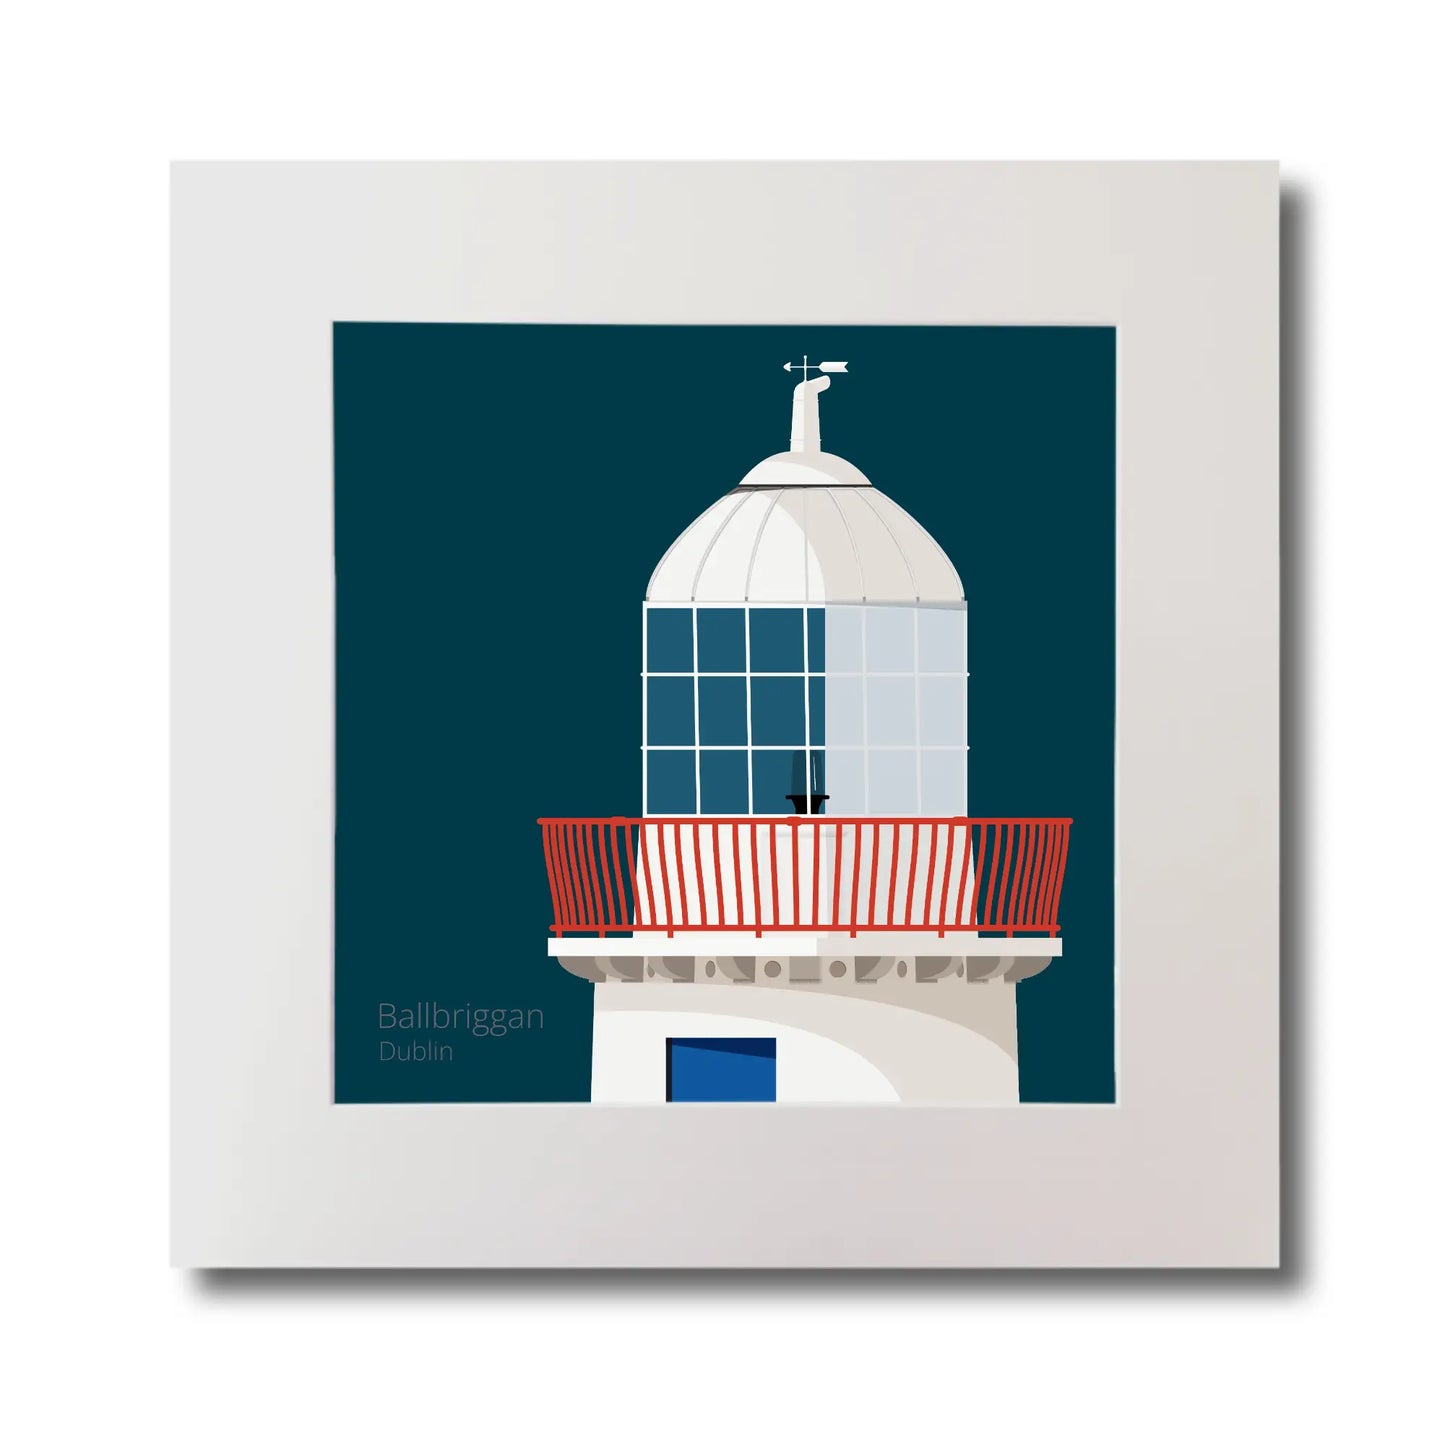 Illustration Ballbriggan lighthouse on a midnight blue background, mounted and measuring 30x30cm.